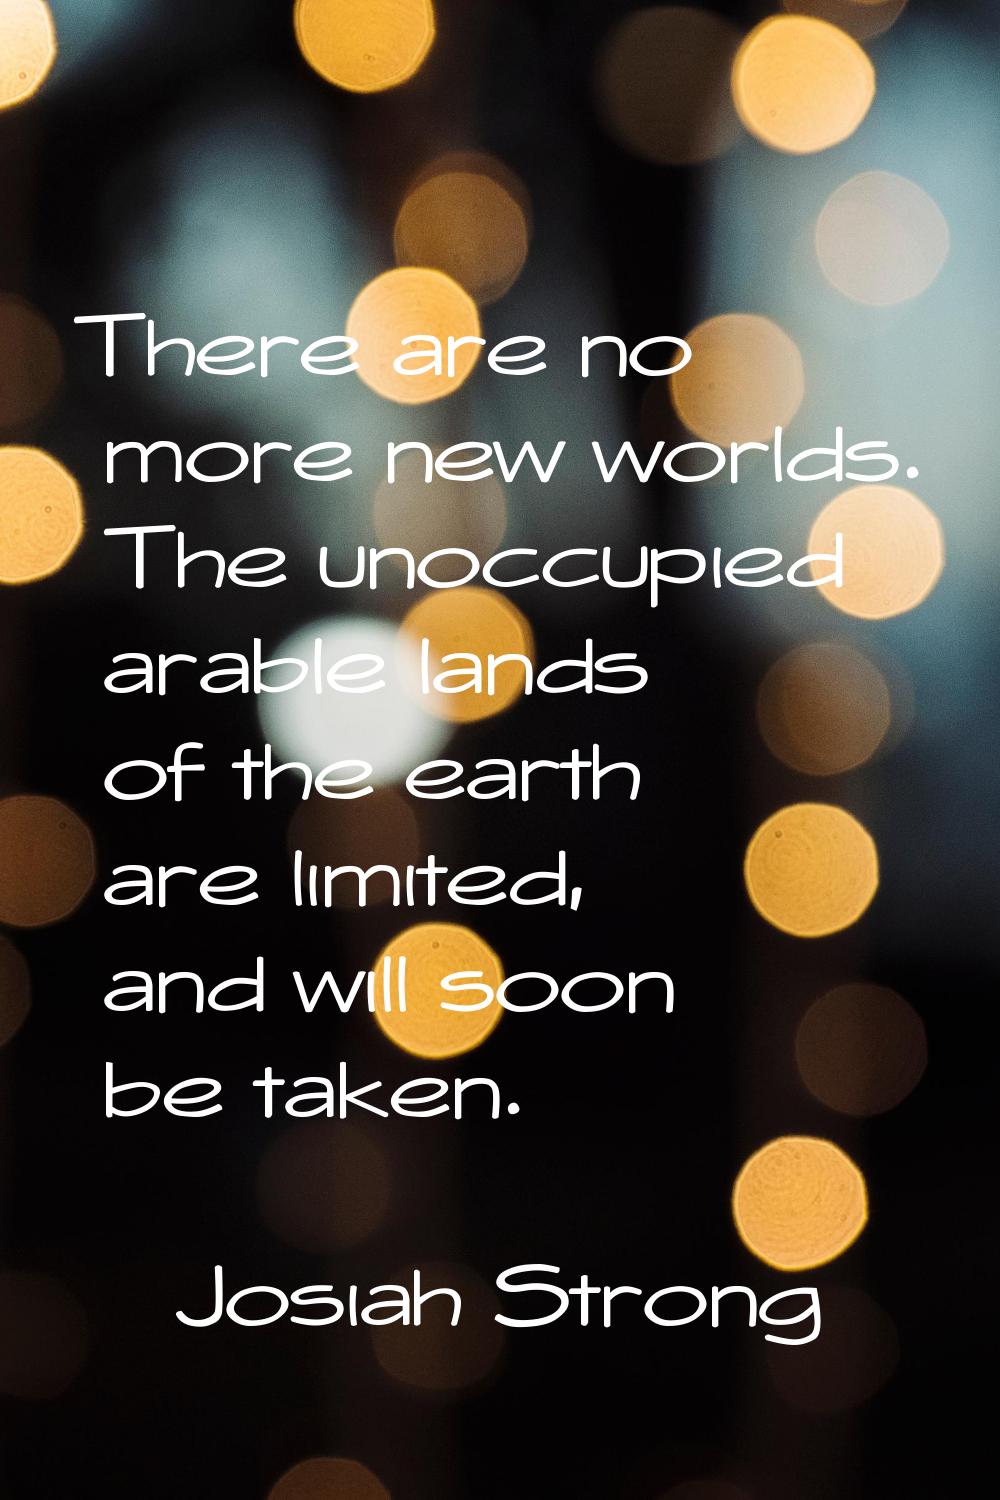 There are no more new worlds. The unoccupied arable lands of the earth are limited, and will soon b